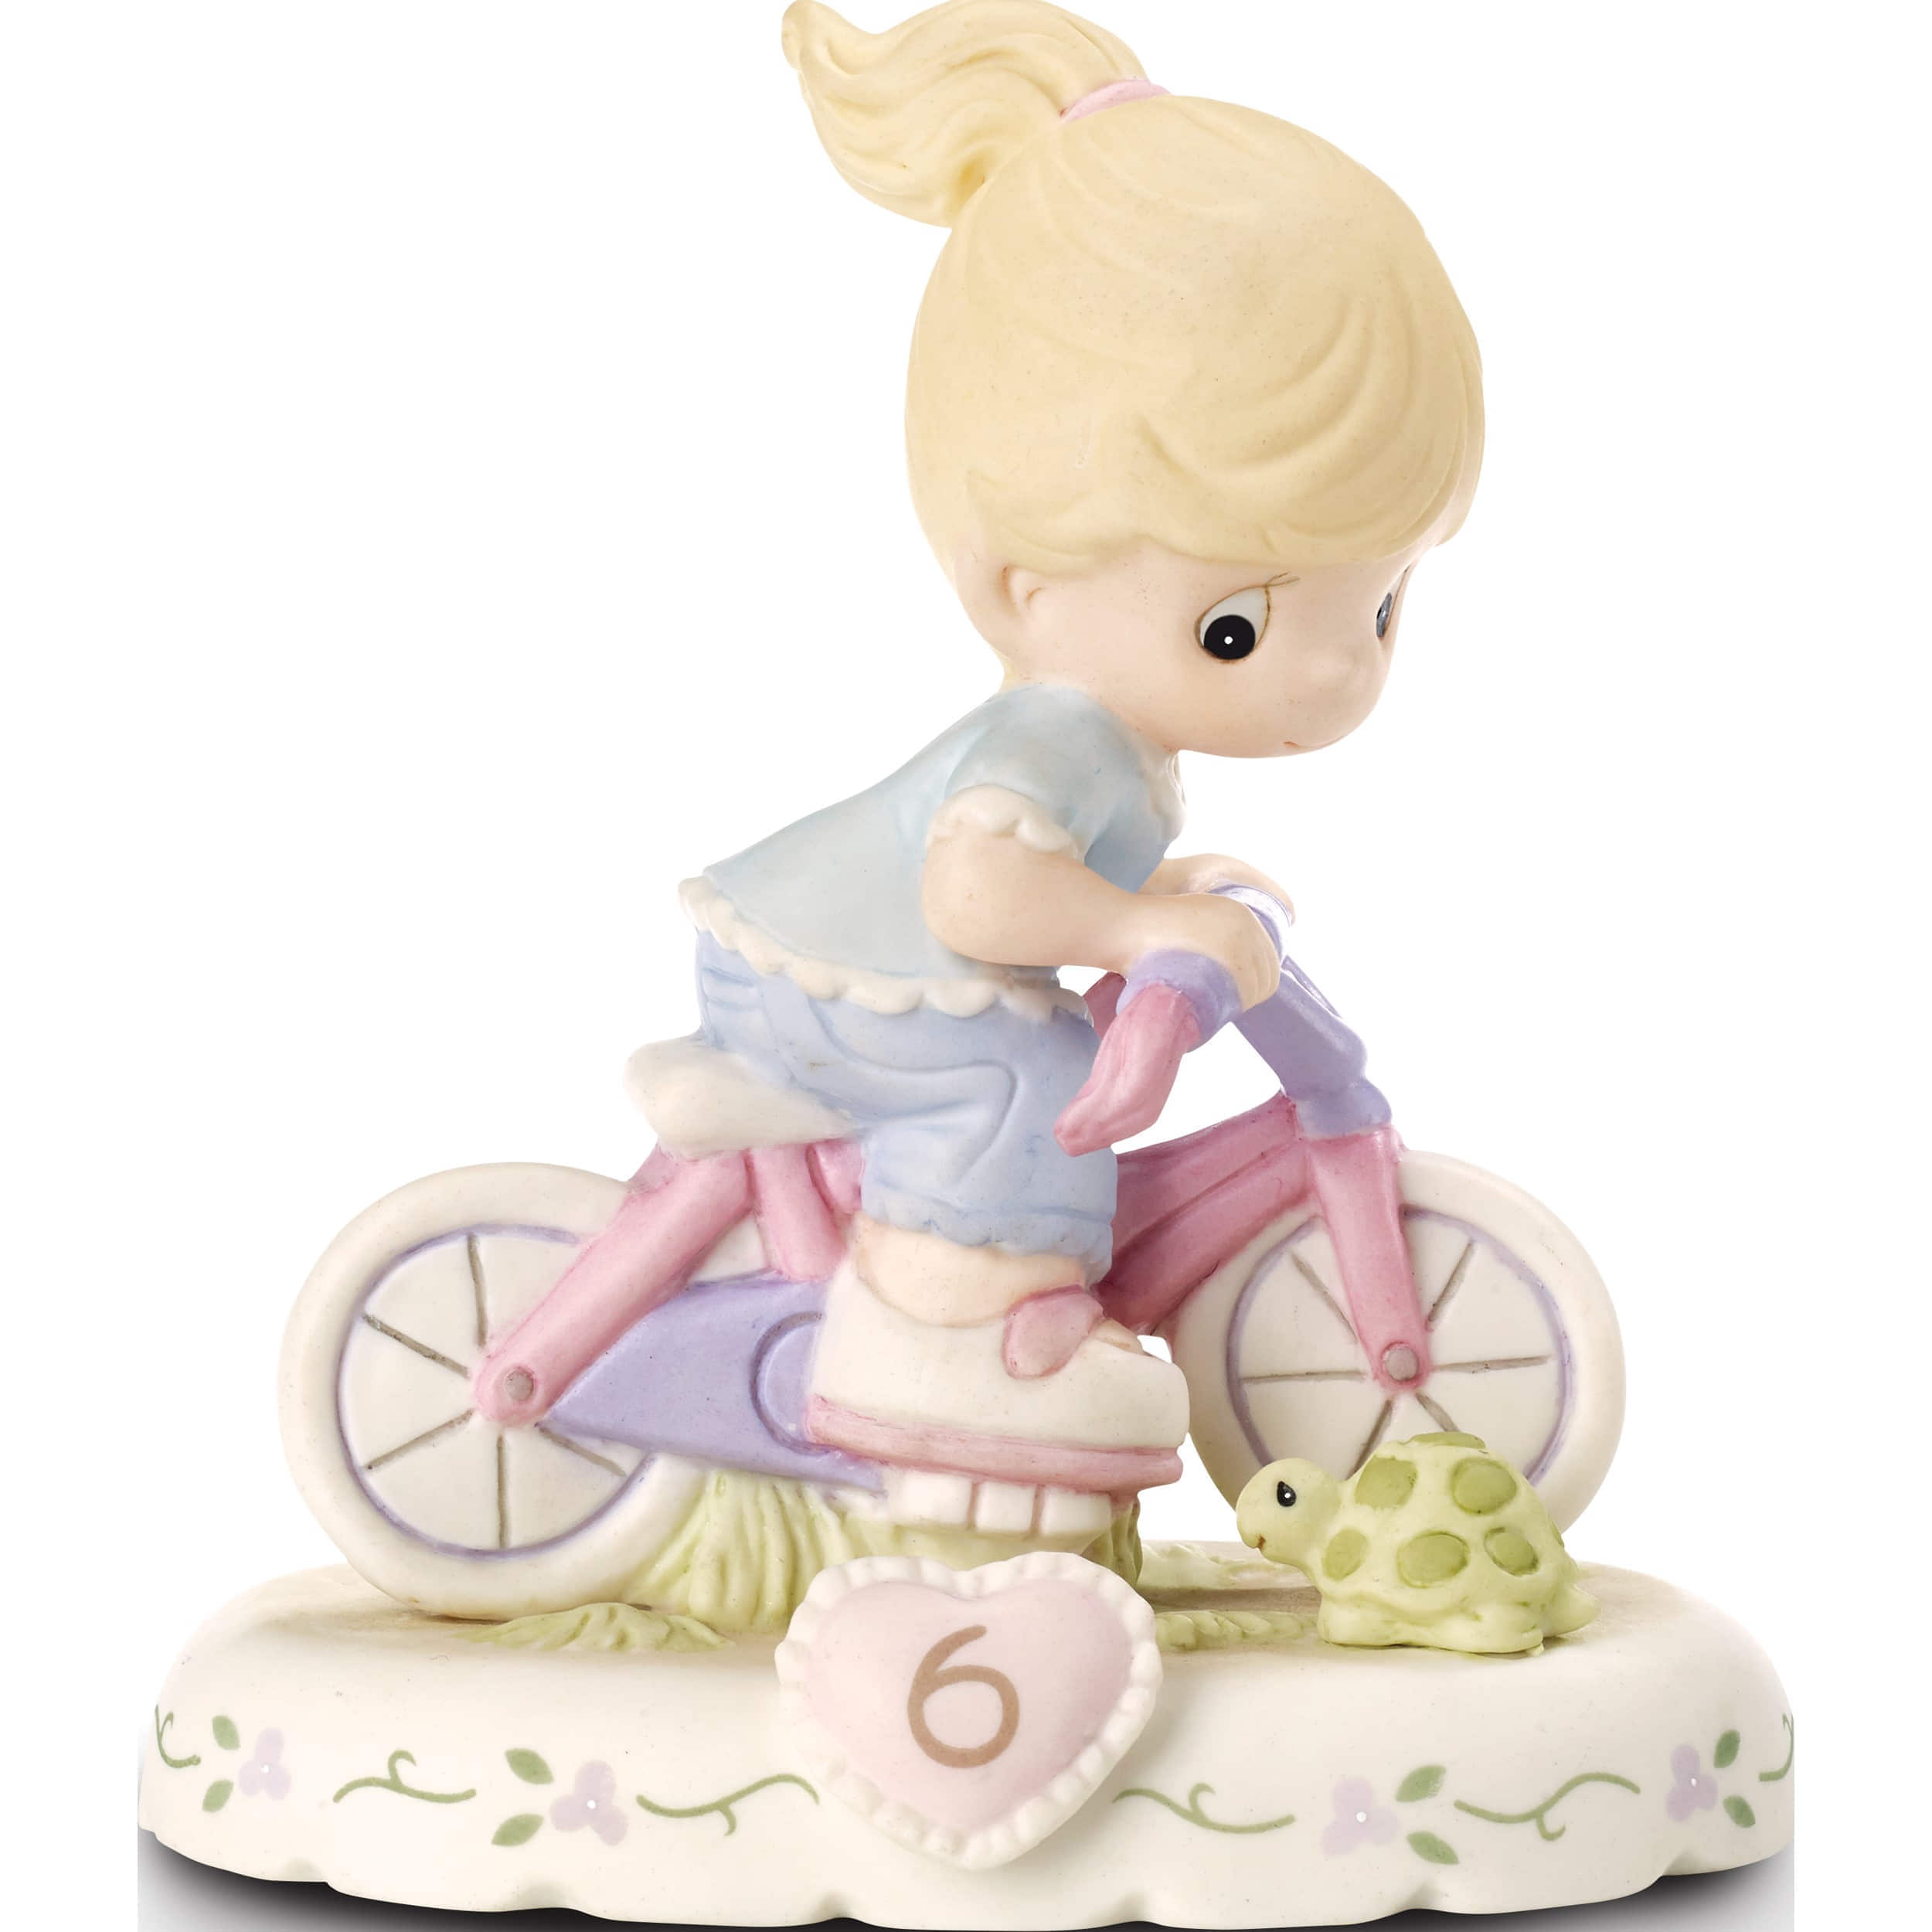 Fashion Precious Moments Growing In Grace Age Six Porcelain Figurine (4.9 X 4.1) Made China gp724 - image 1 of 4